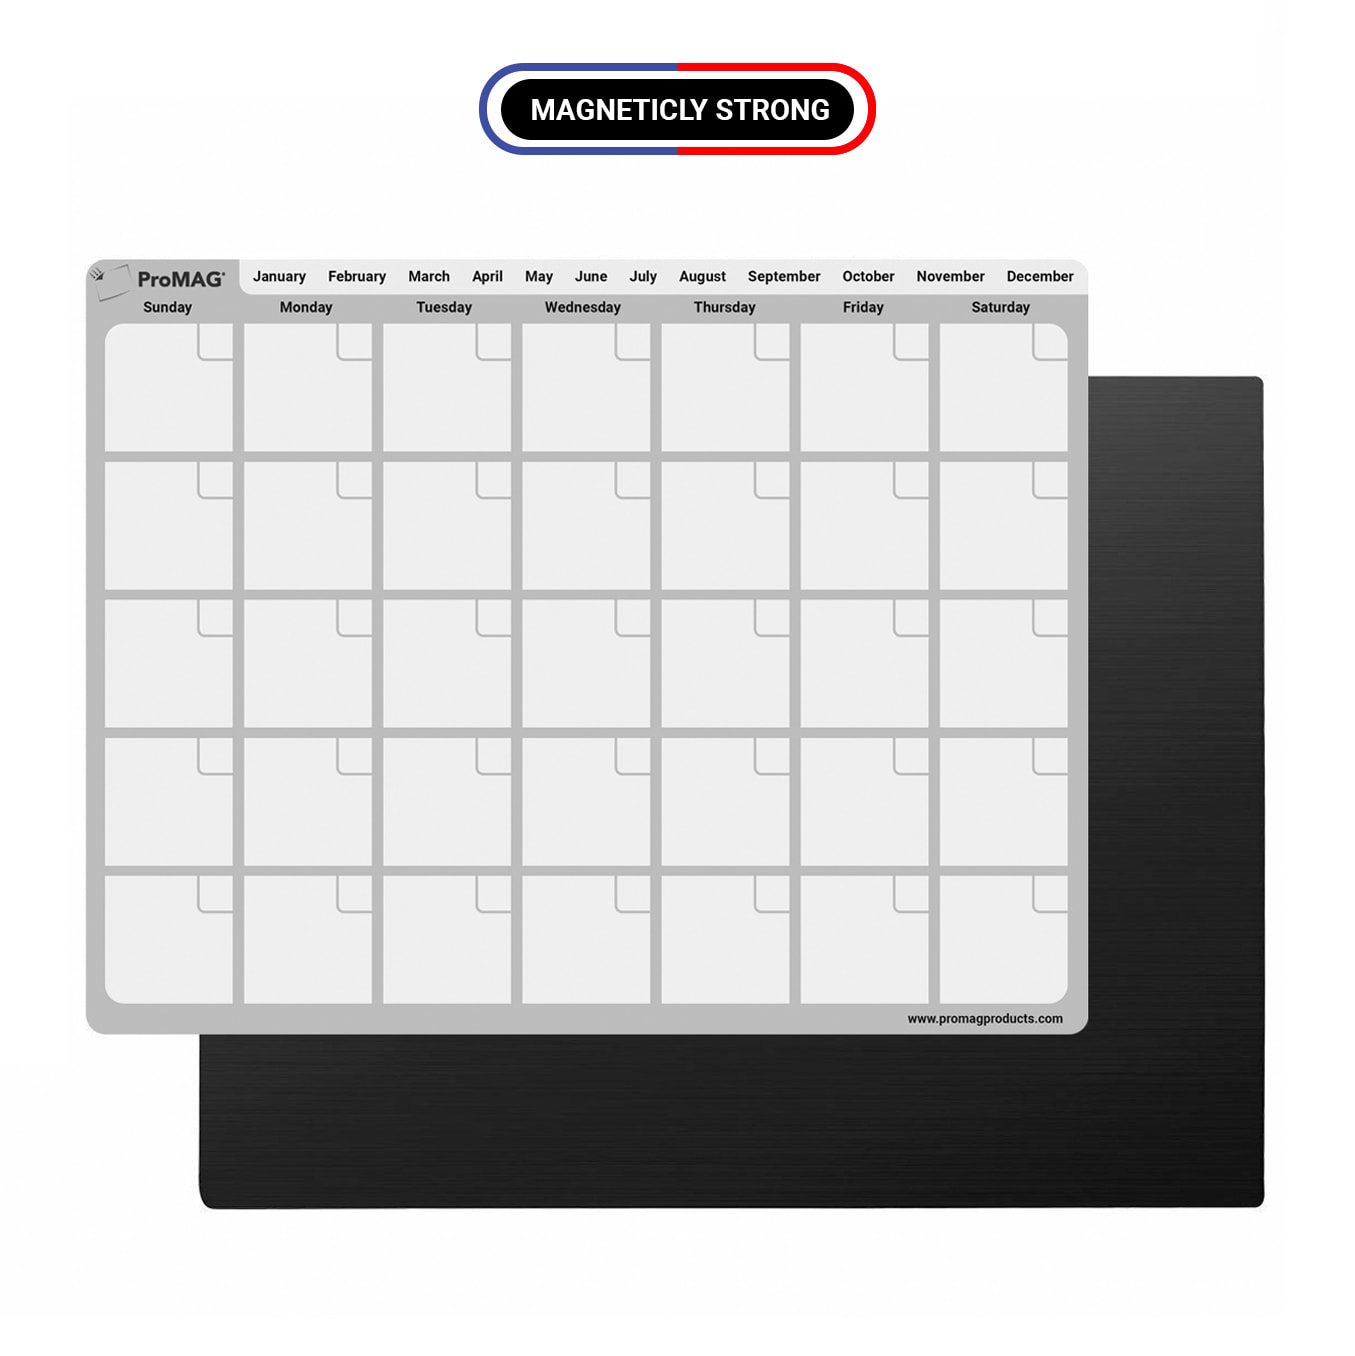 ProMAG 8.5 x 11 Inches Monthly Dry Erase Magnetic Calendar 